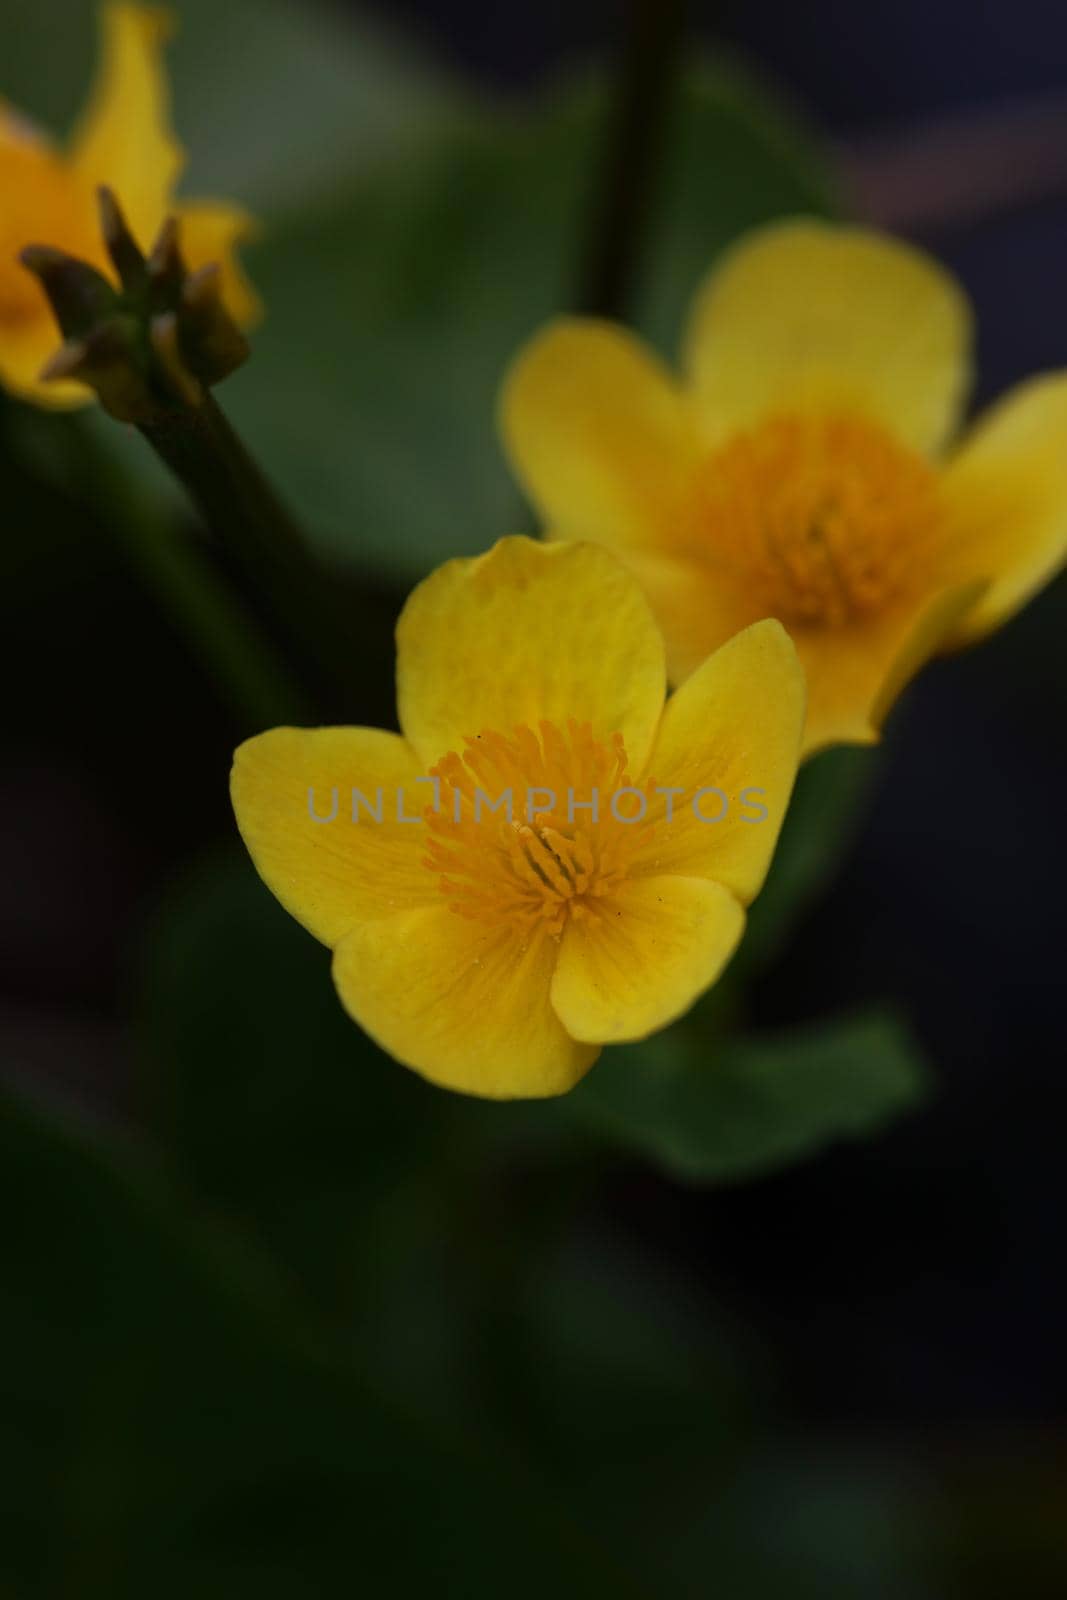 Yellow flower close up background Caltha palustris family ranunculaceae blossoming botanical modern high quality big size print by BakalaeroZz